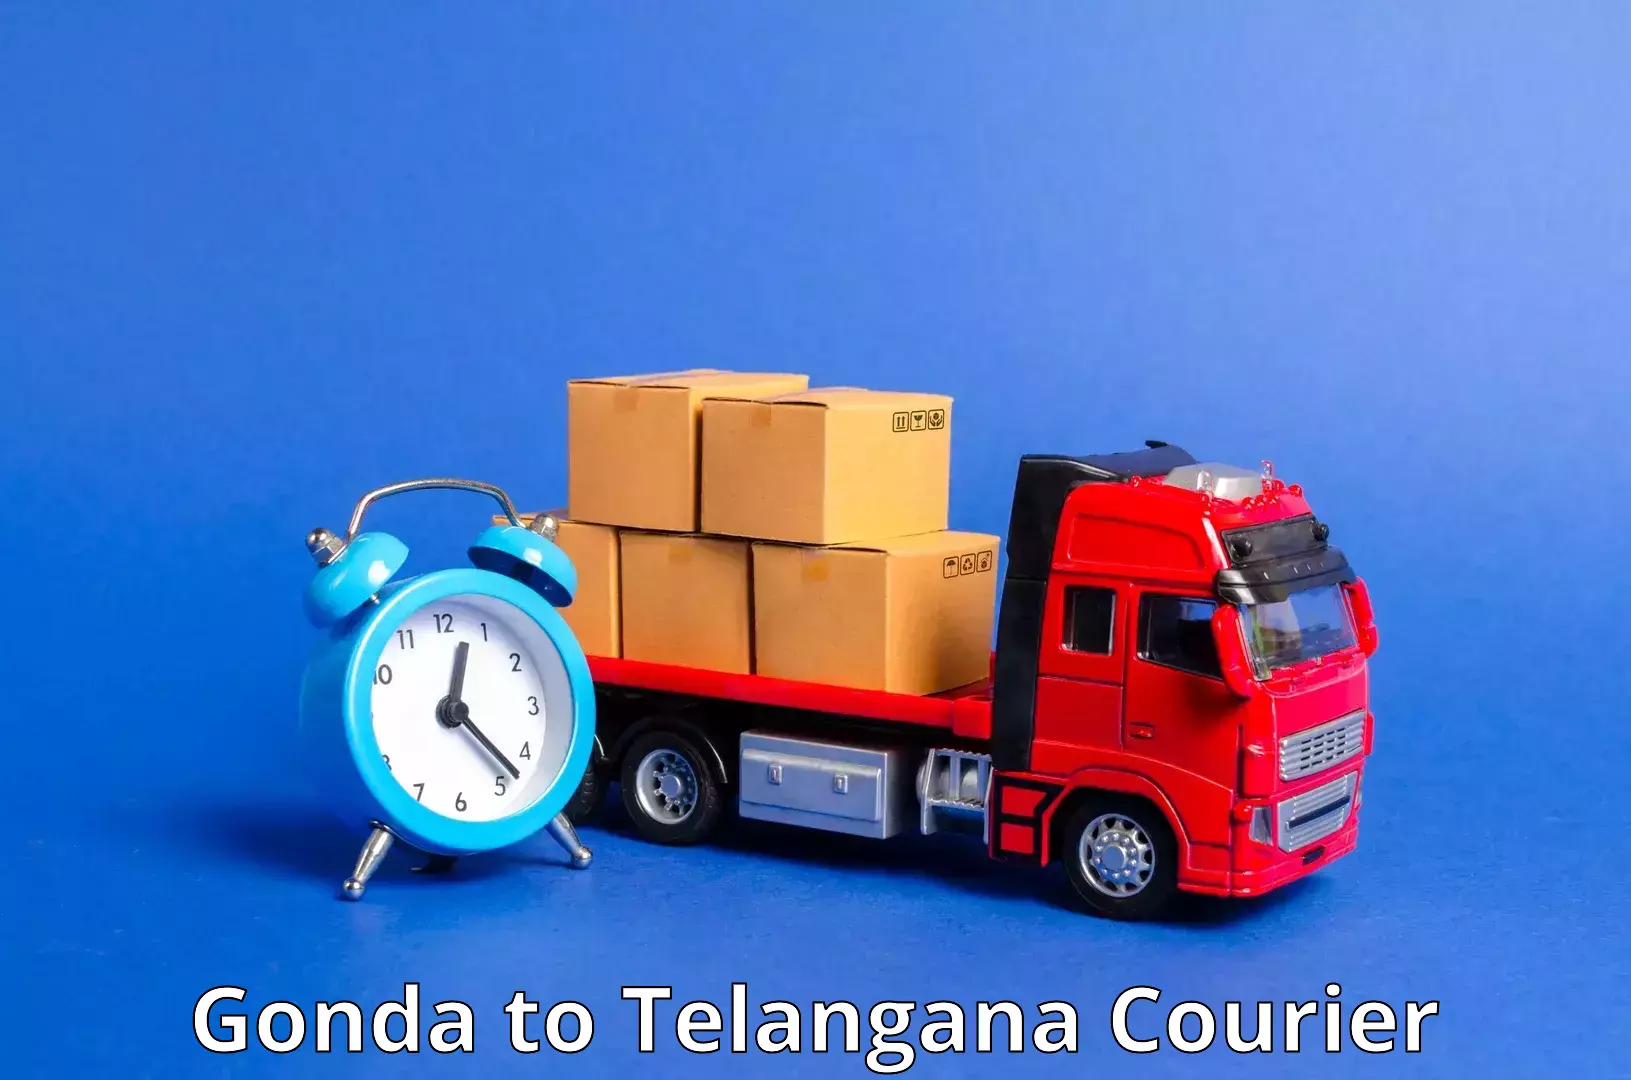 Cash on delivery service in Gonda to Nizamabad